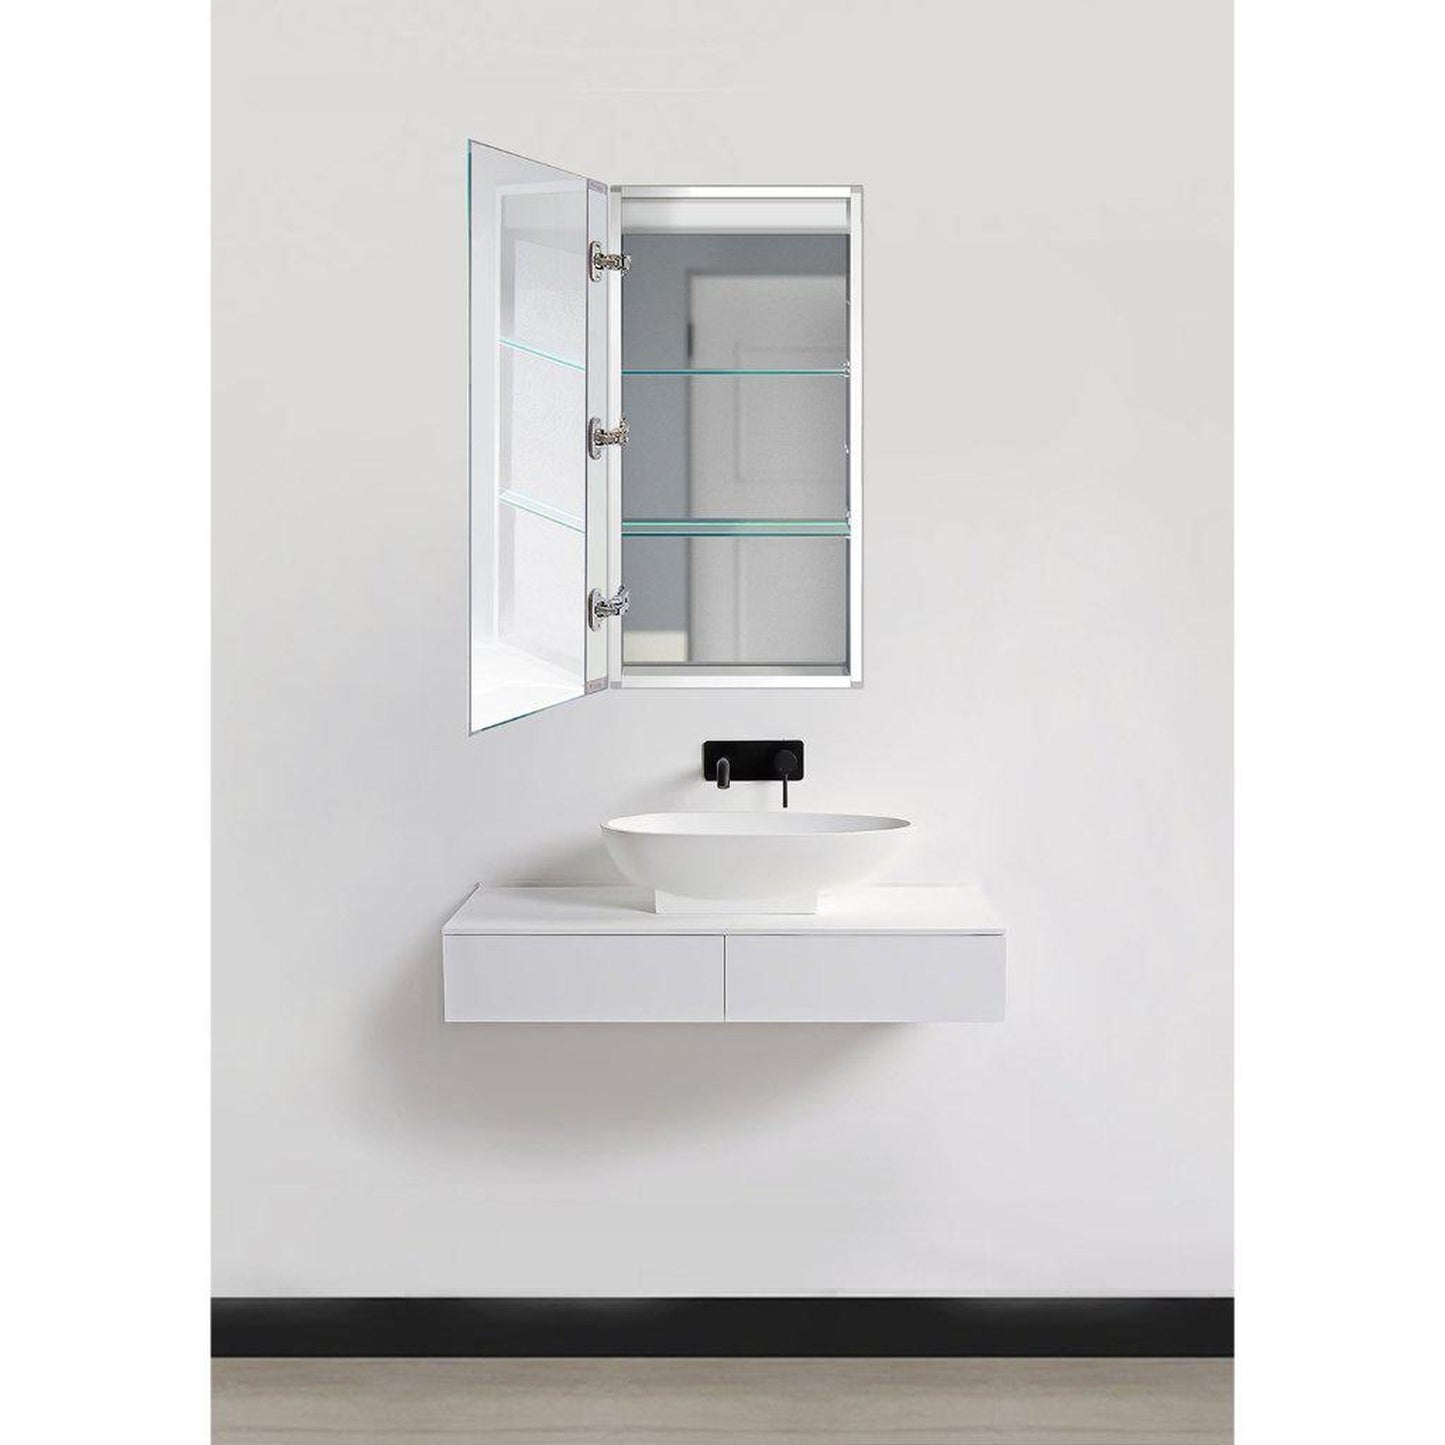 Krugg Reflections Kinetic 15" x 30" 6000K Single Left Opening Rectangular Recessed/Surface-Mount Illuminated Silver Backed LED Medicine Cabinet Mirror With Built-in Defogger, Dimmer and Electrical Outlet